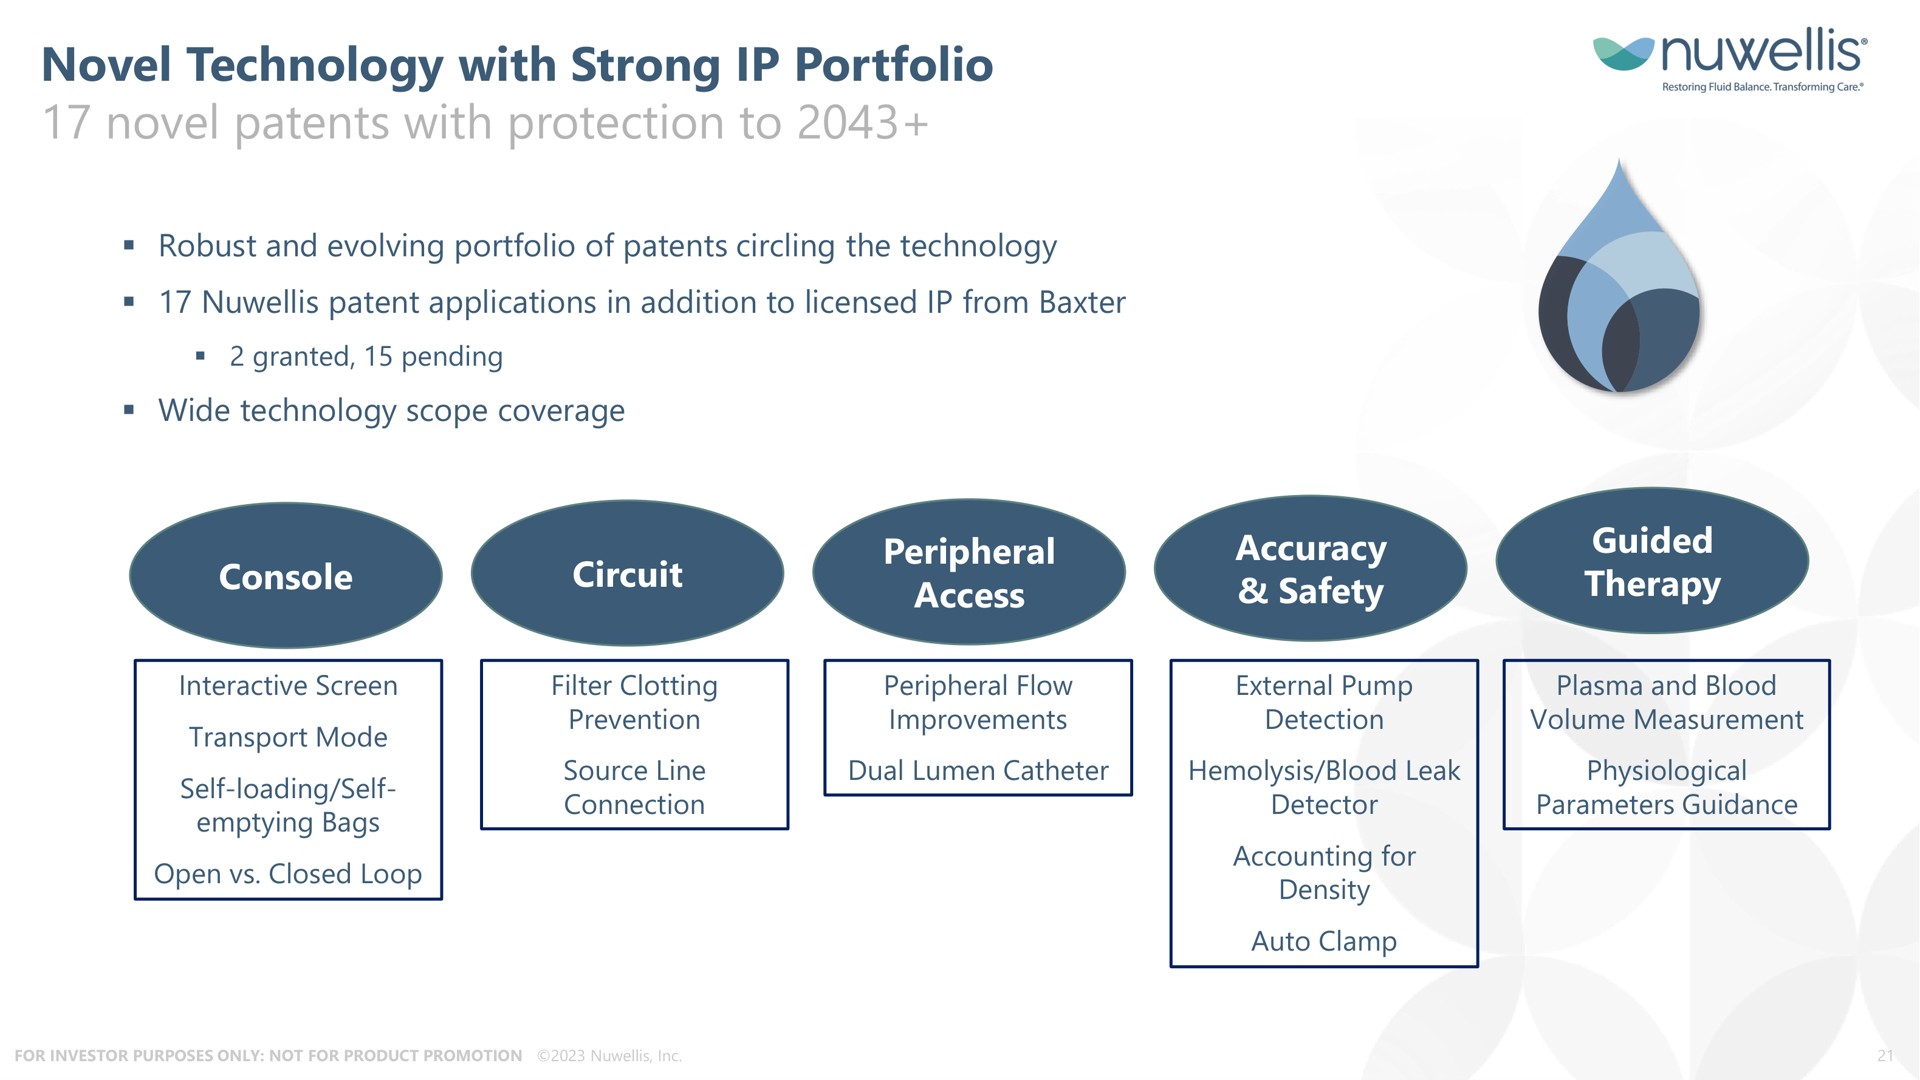 novel technology with strong portfolio novel patents with protection to | Nuwellis